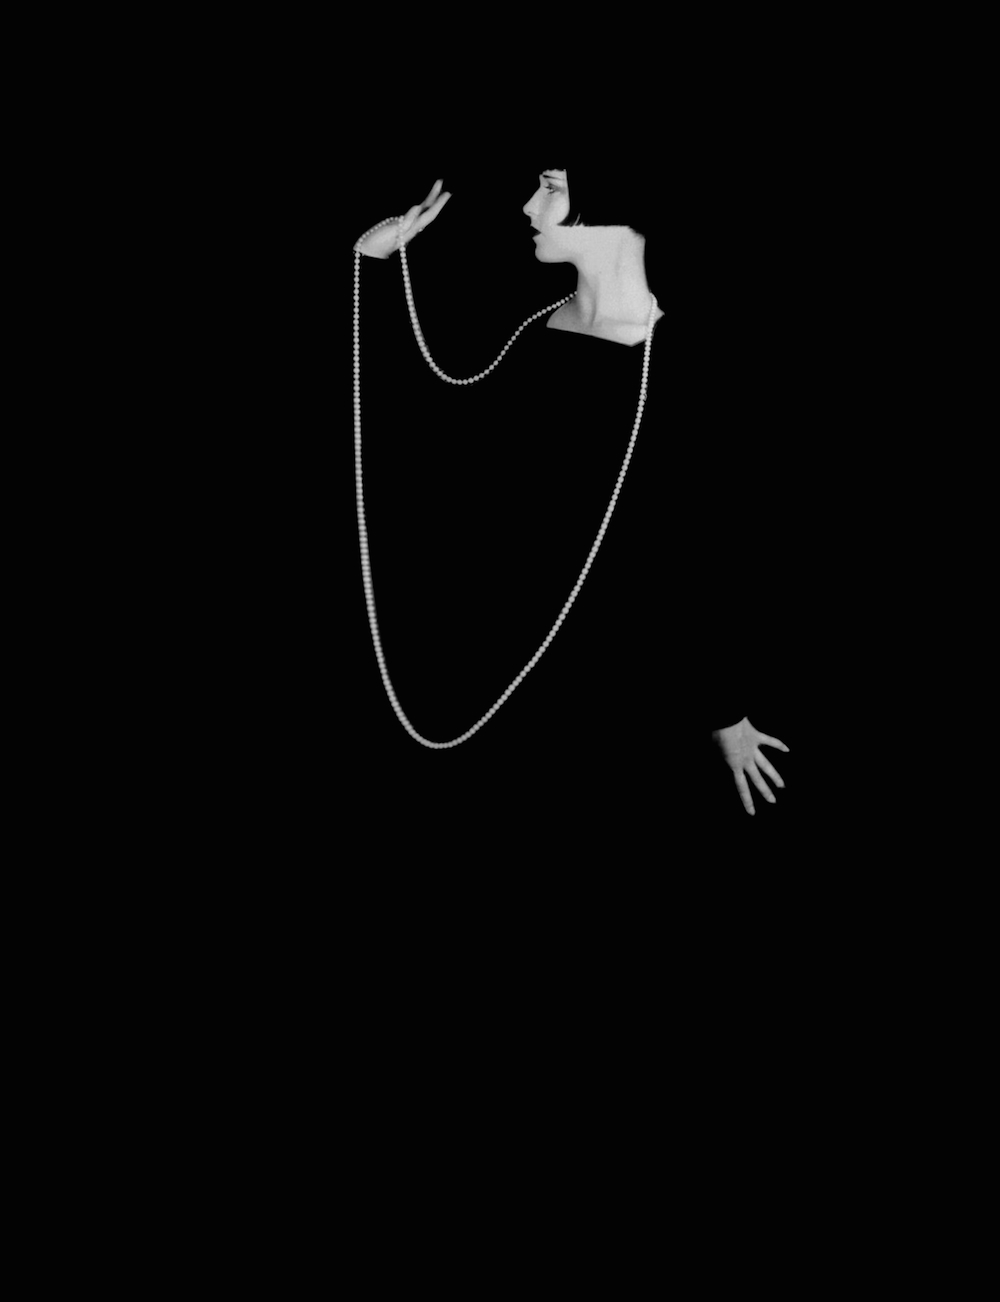 Louise Brooks by Eugene Robert Richee